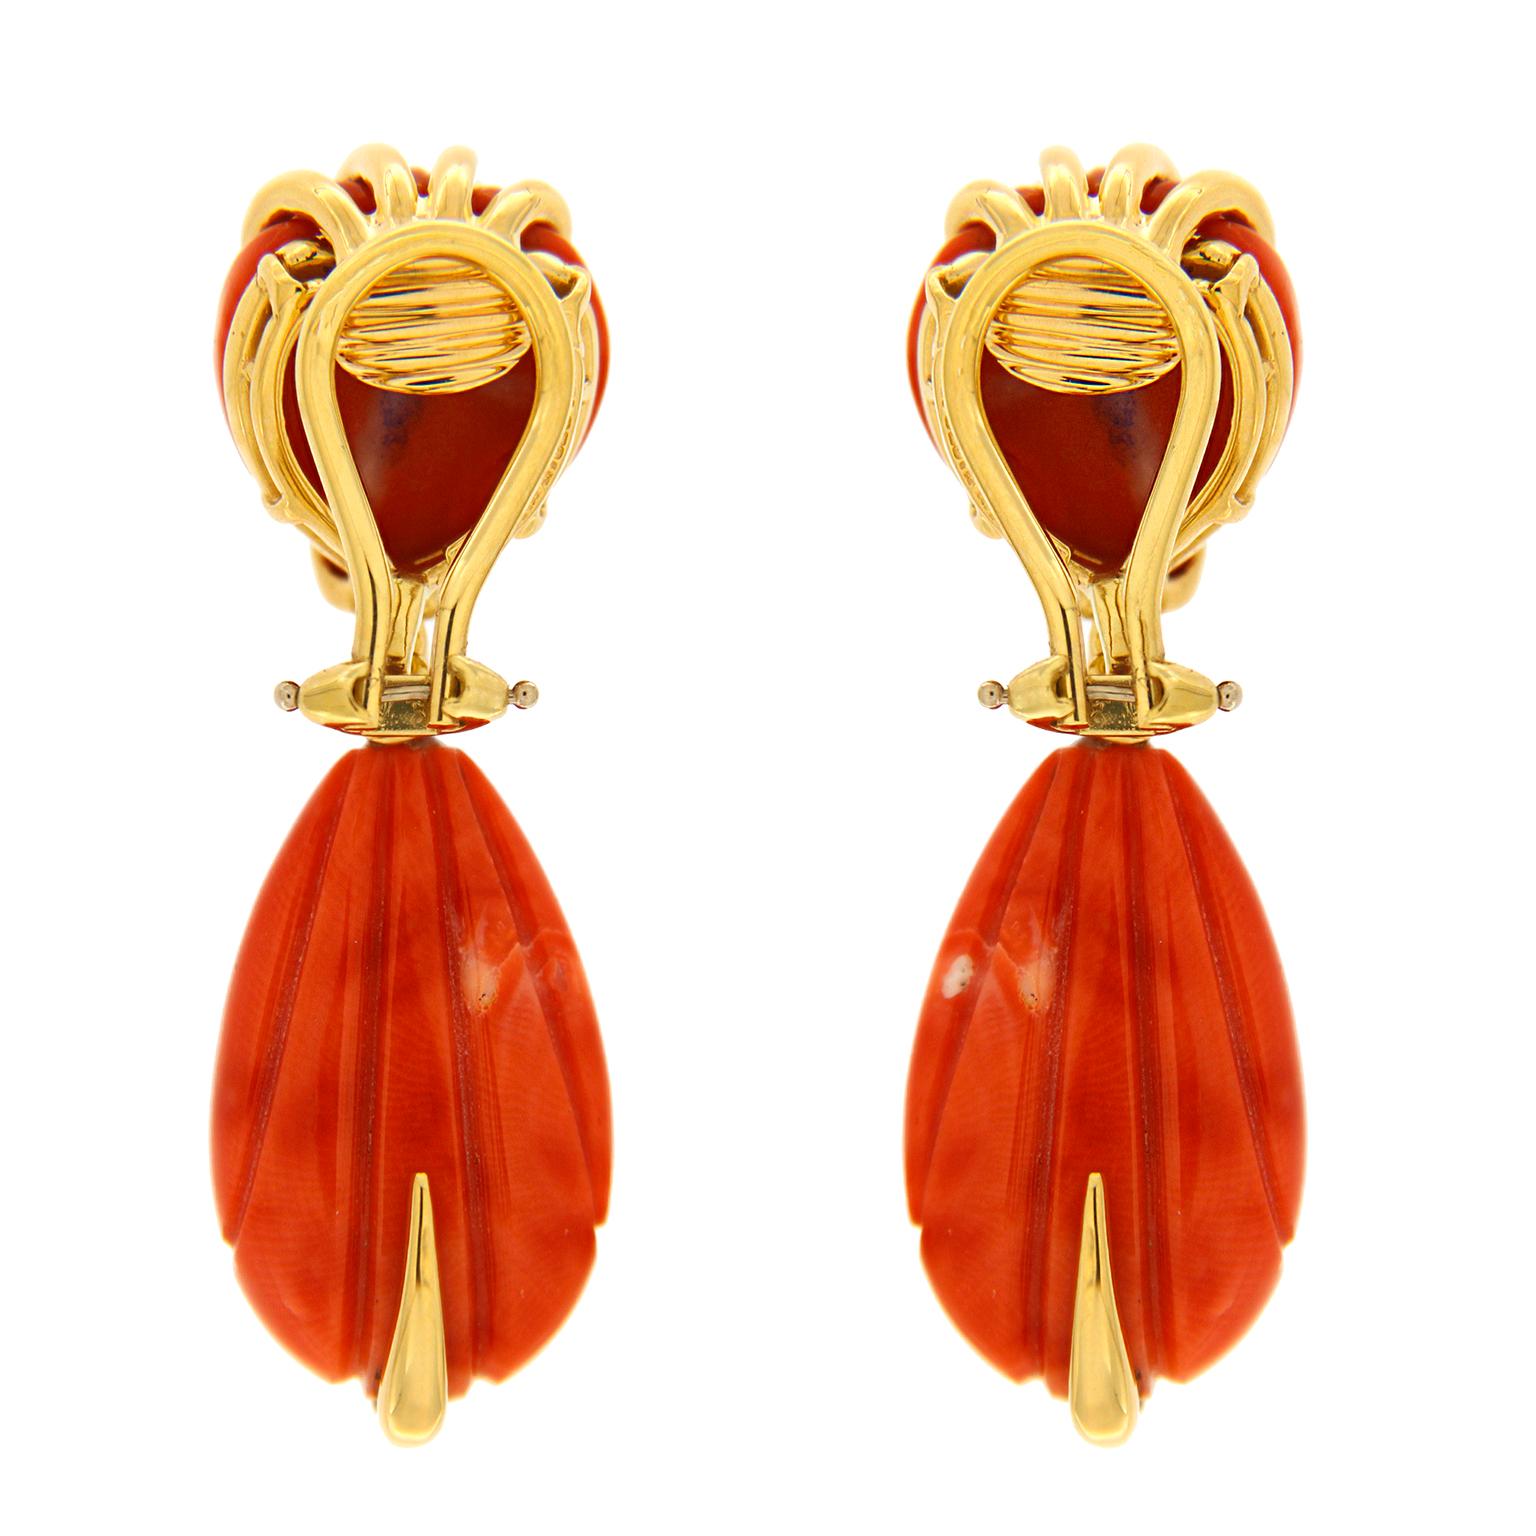 Brilliant Cut Valentin Magro Carved Red Coral Earrings with Gold Accent Wires